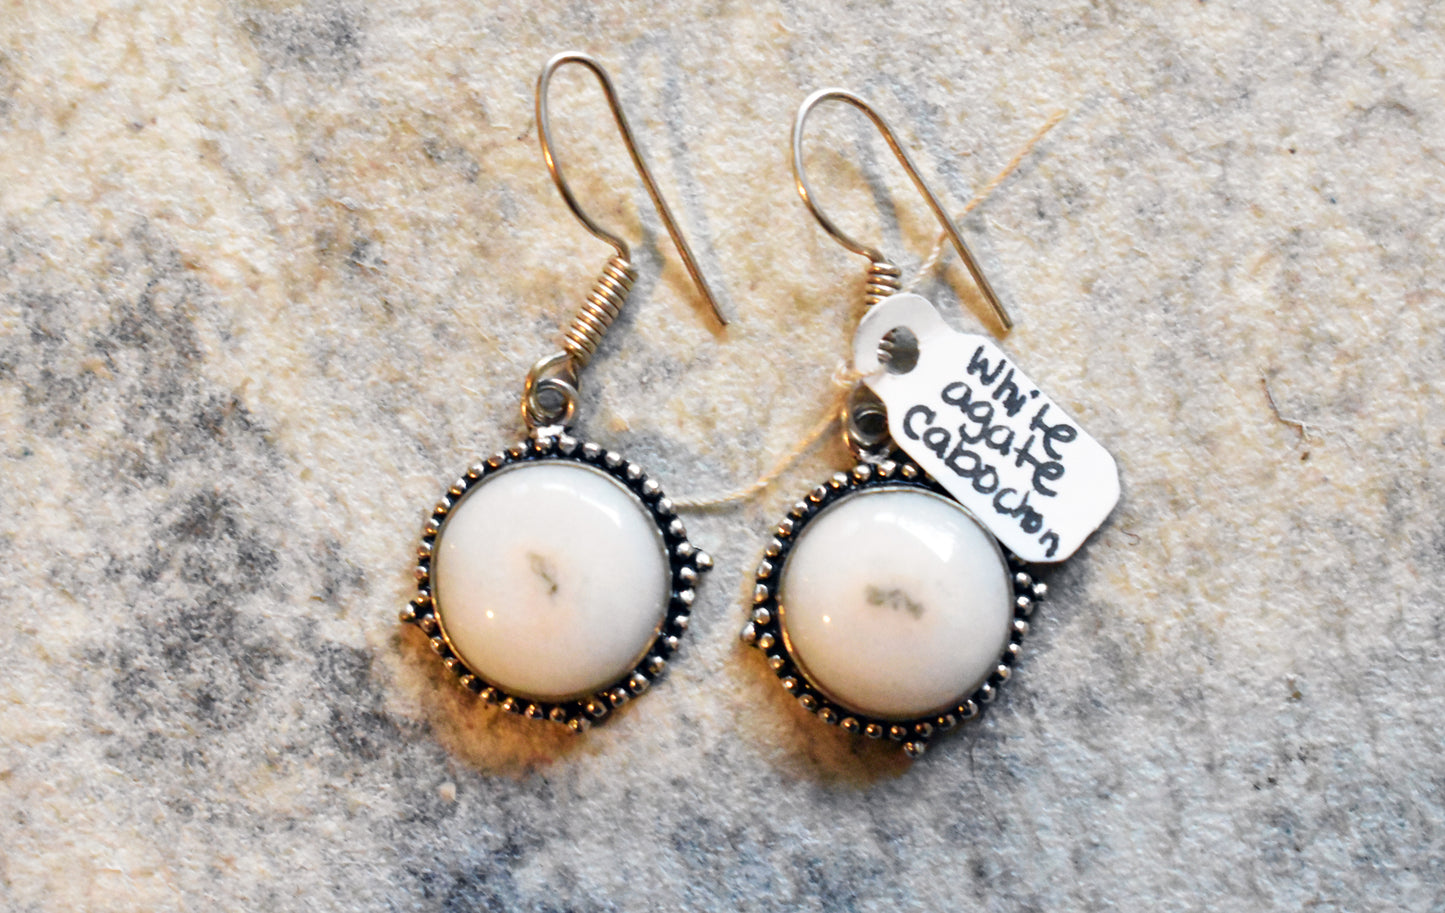 stones-of-transformation - White Agate Cabochon Earrings - Stones of Transformation - 